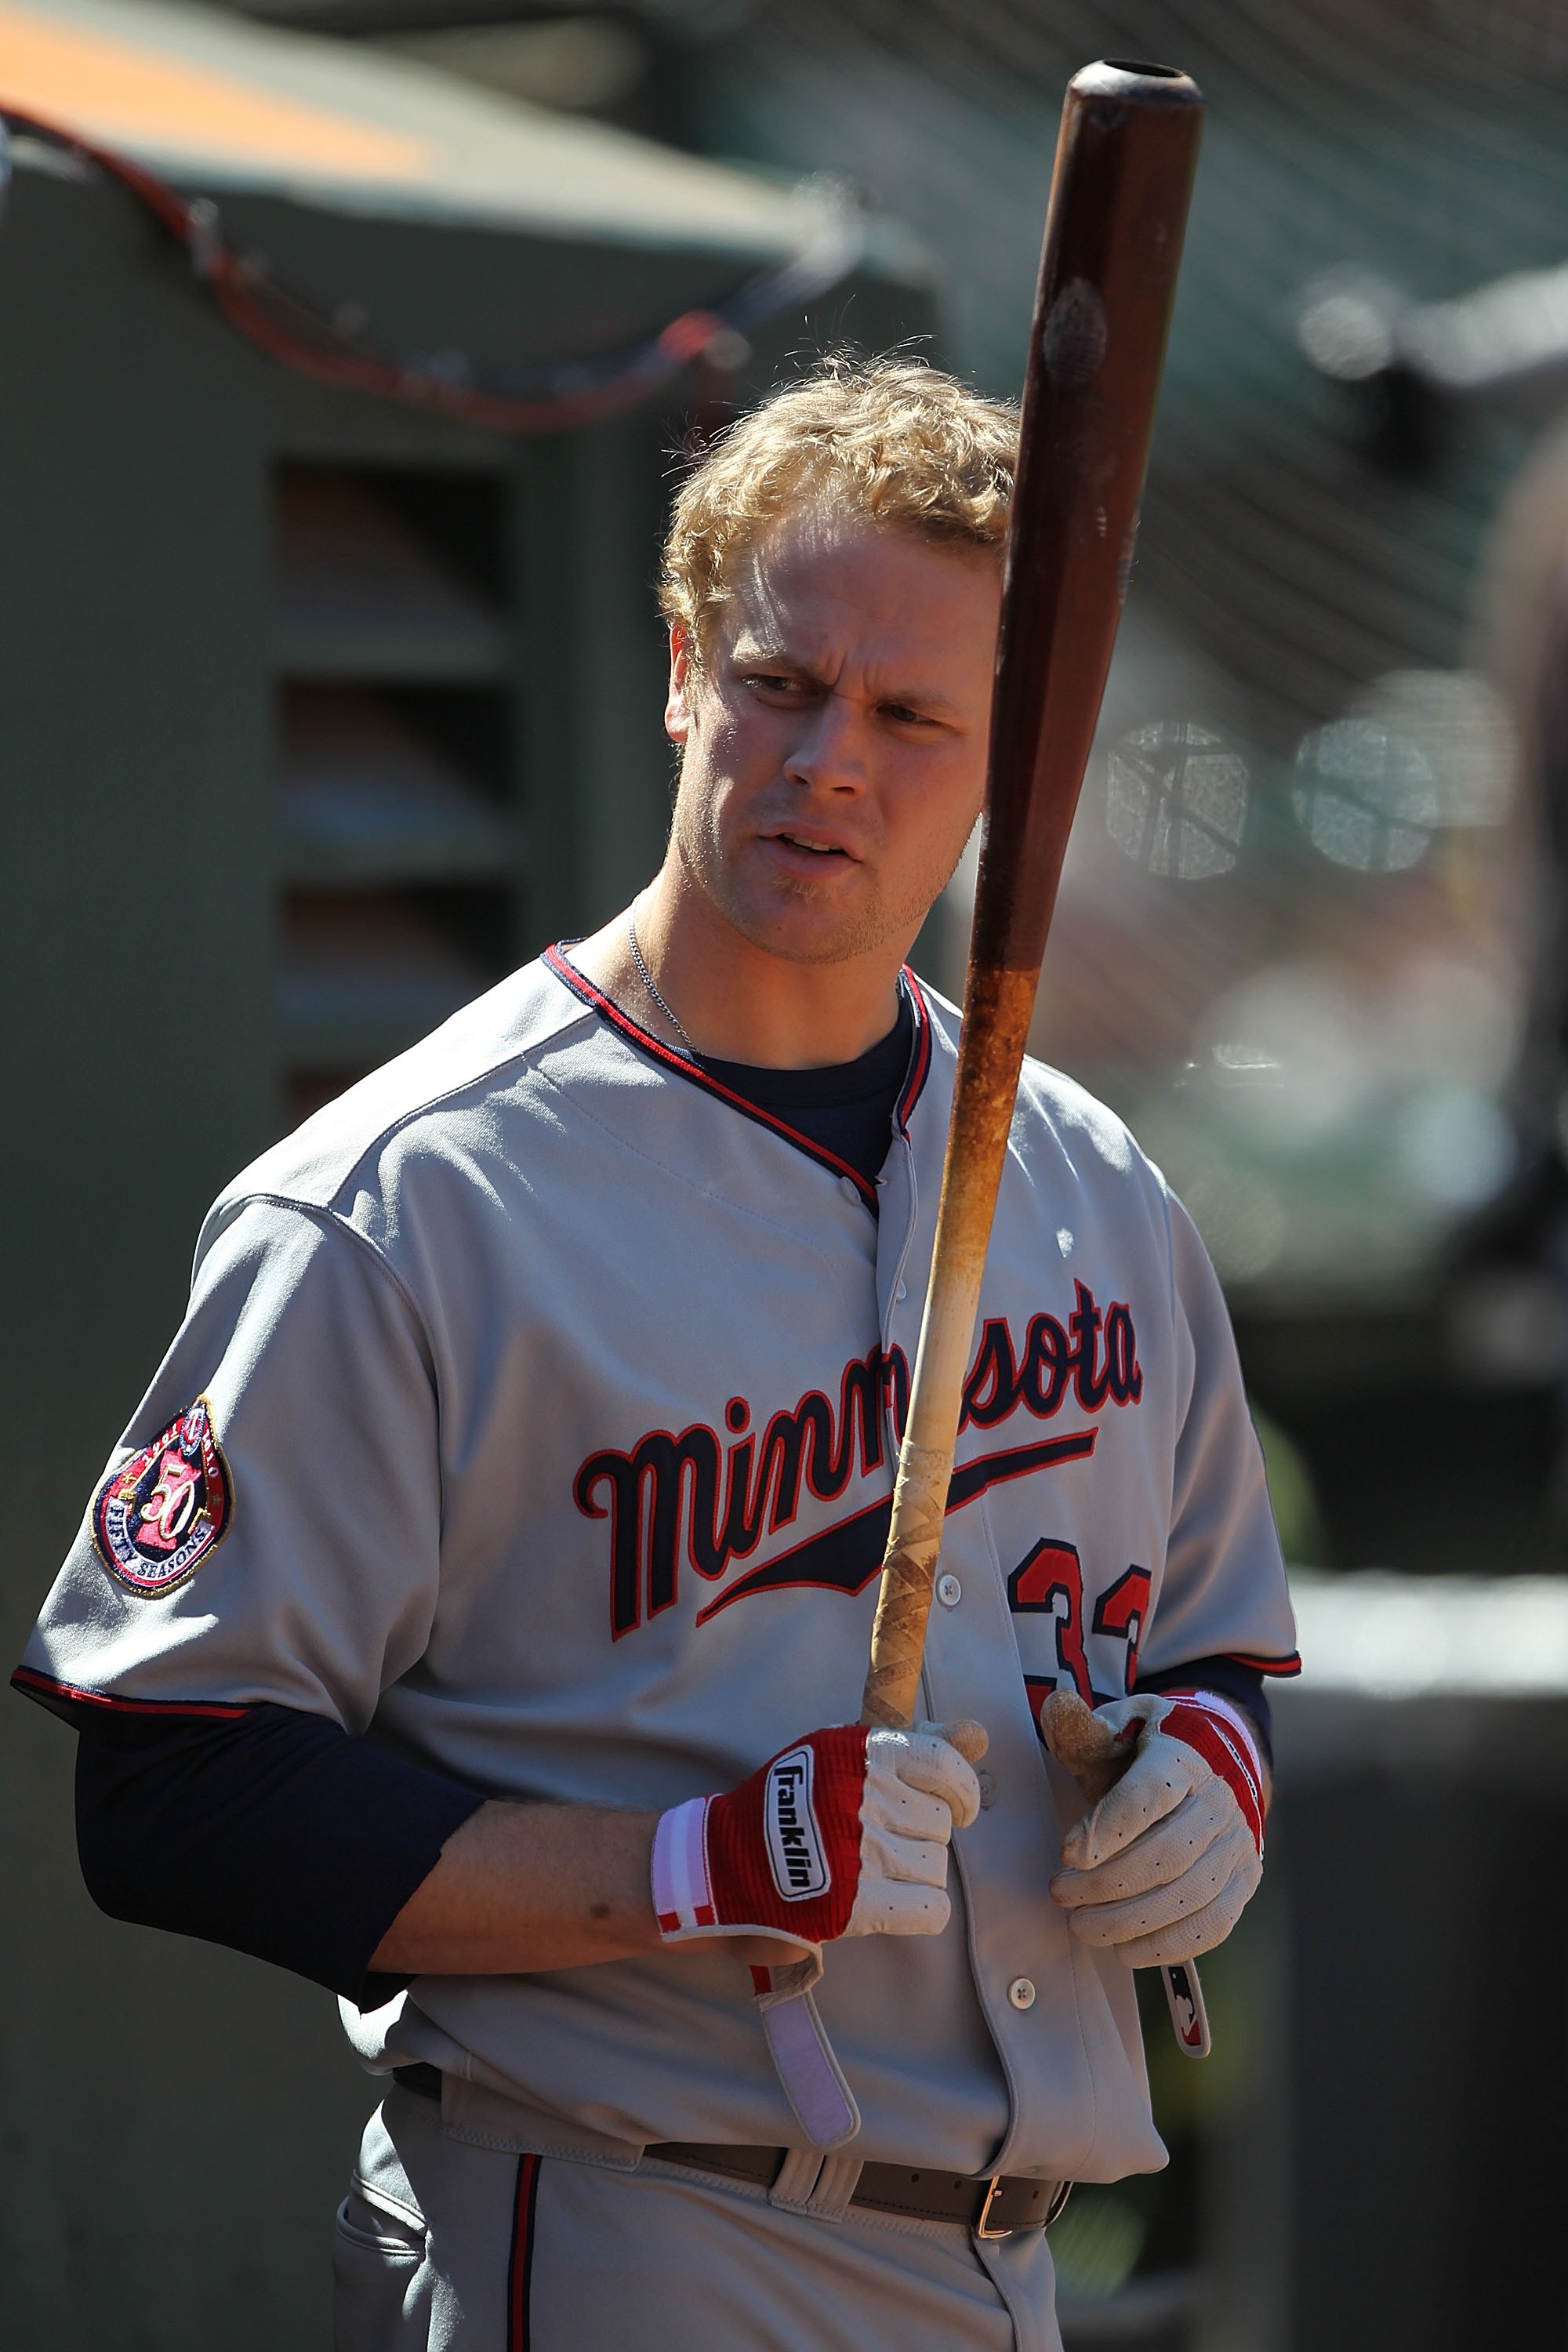 OAKLAND, CA - JUNE 06:  Justin Morneau #33 of the Minnesota Twins prepares to bat against the Oakland Athletics during an MLB game at the Oakland-Alameda County Coliseum on June 6, 2010 in Oakland, California.  (Photo by Jed Jacobsohn/Getty Images)